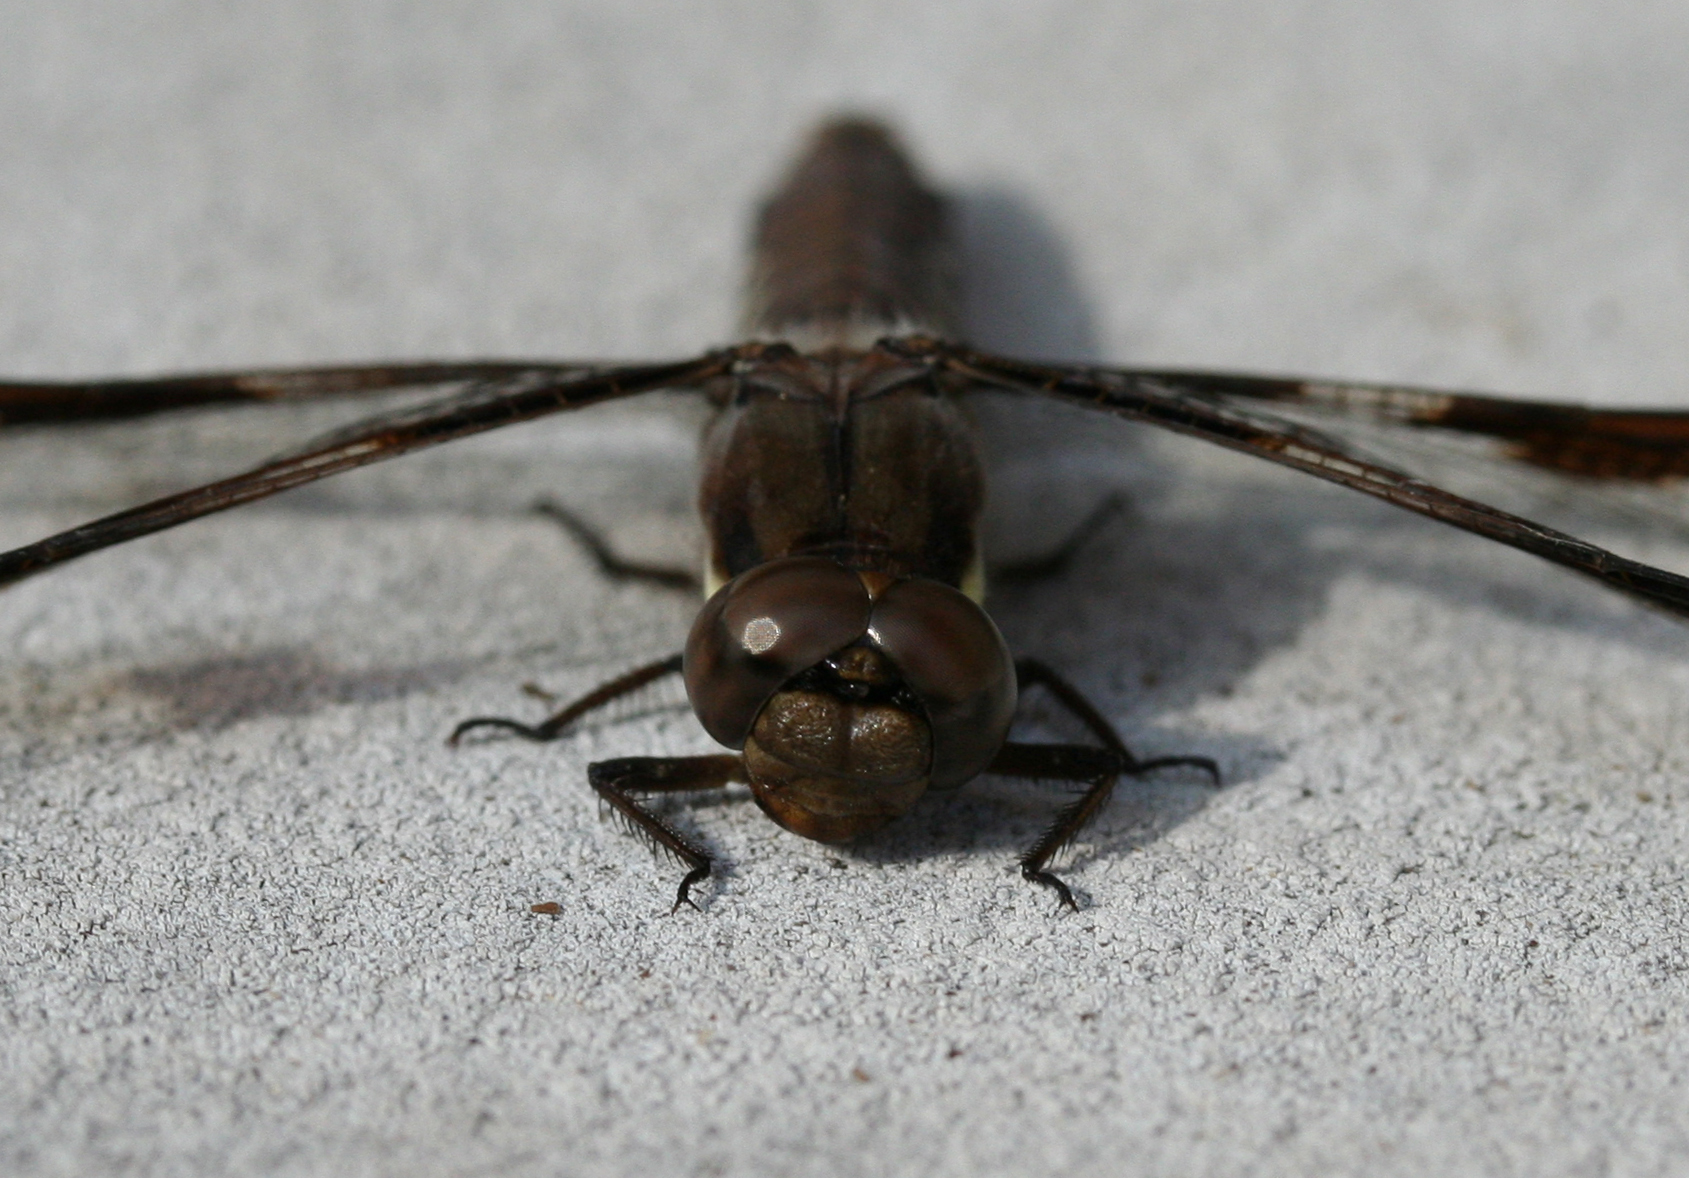 the long - legged insect is on the floor, looking straight ahead